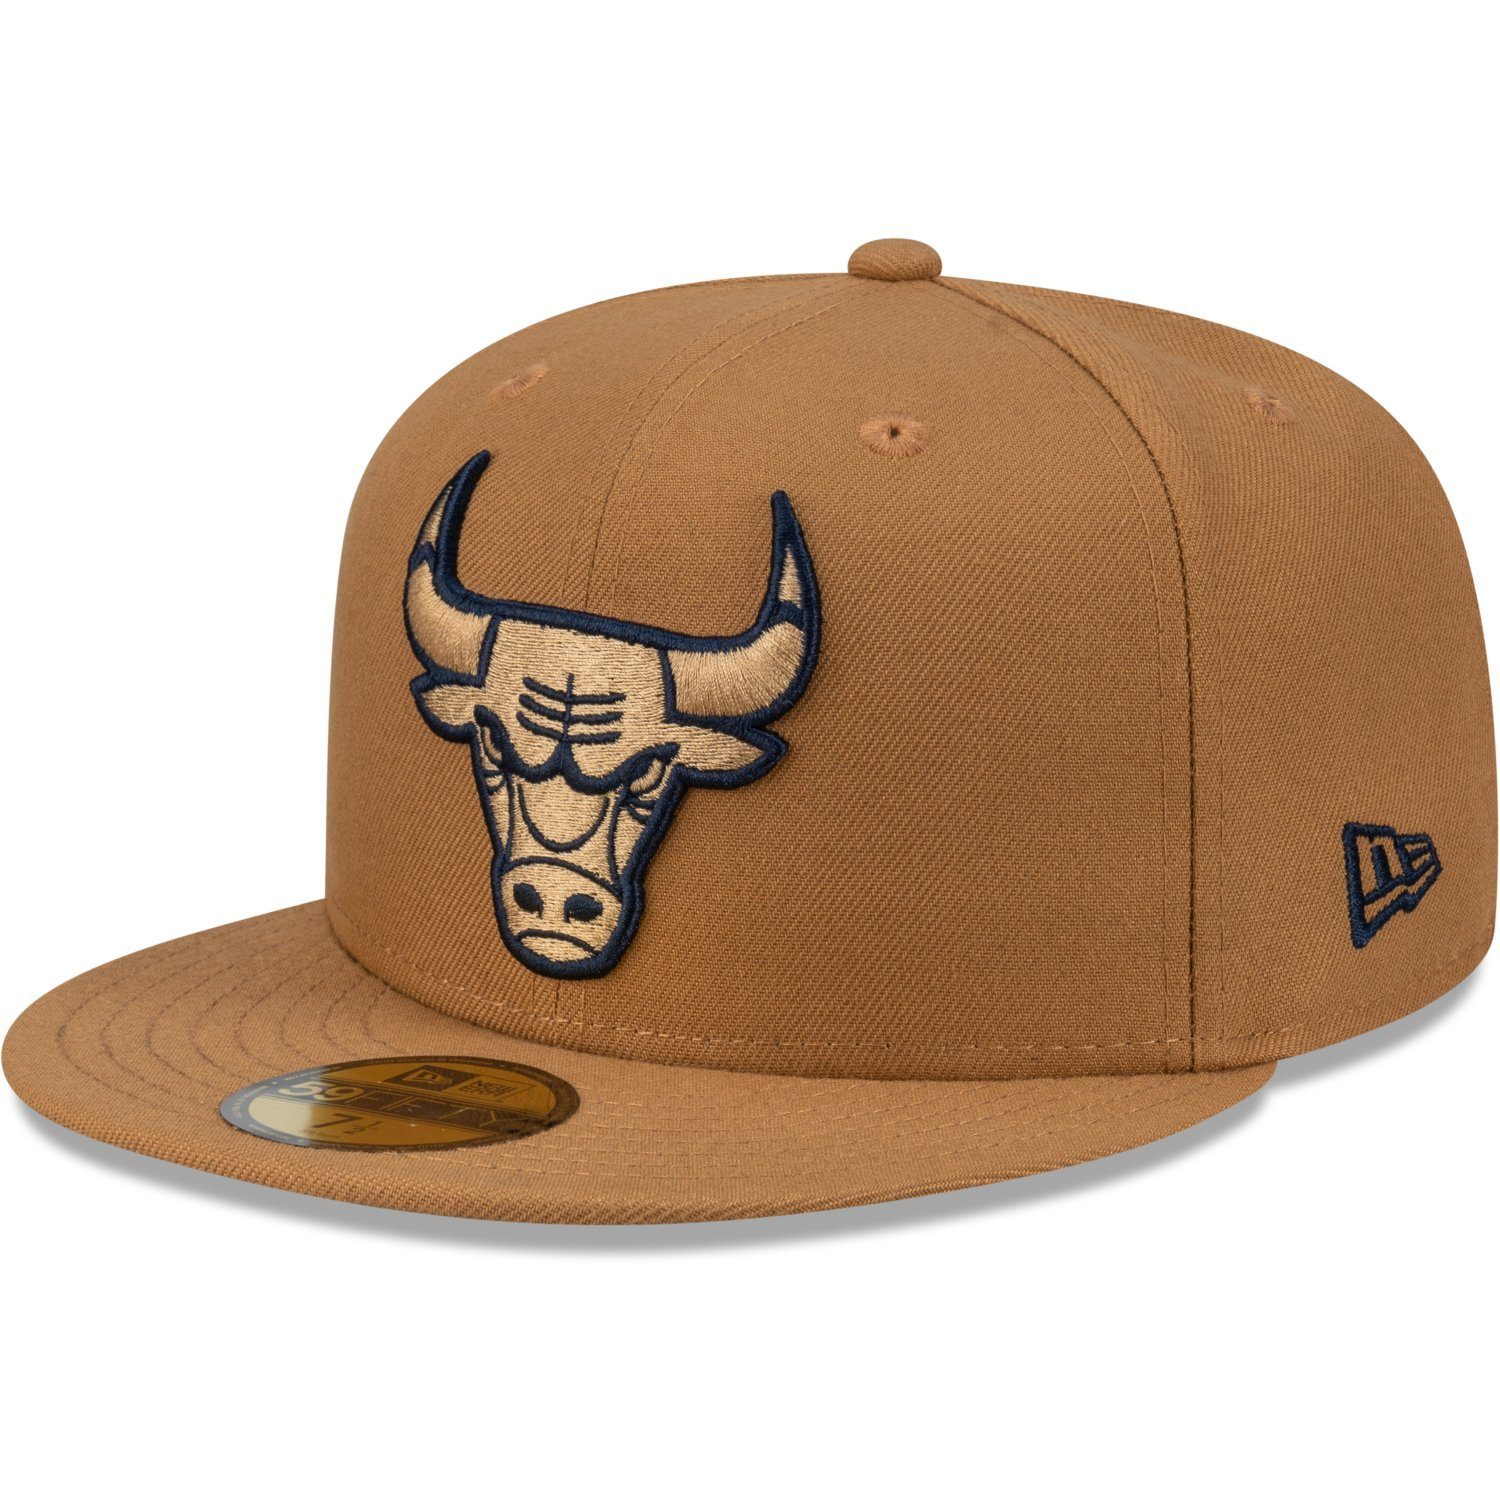 NBA Fitted Cap New Bulls Chicago 59Fifty Era